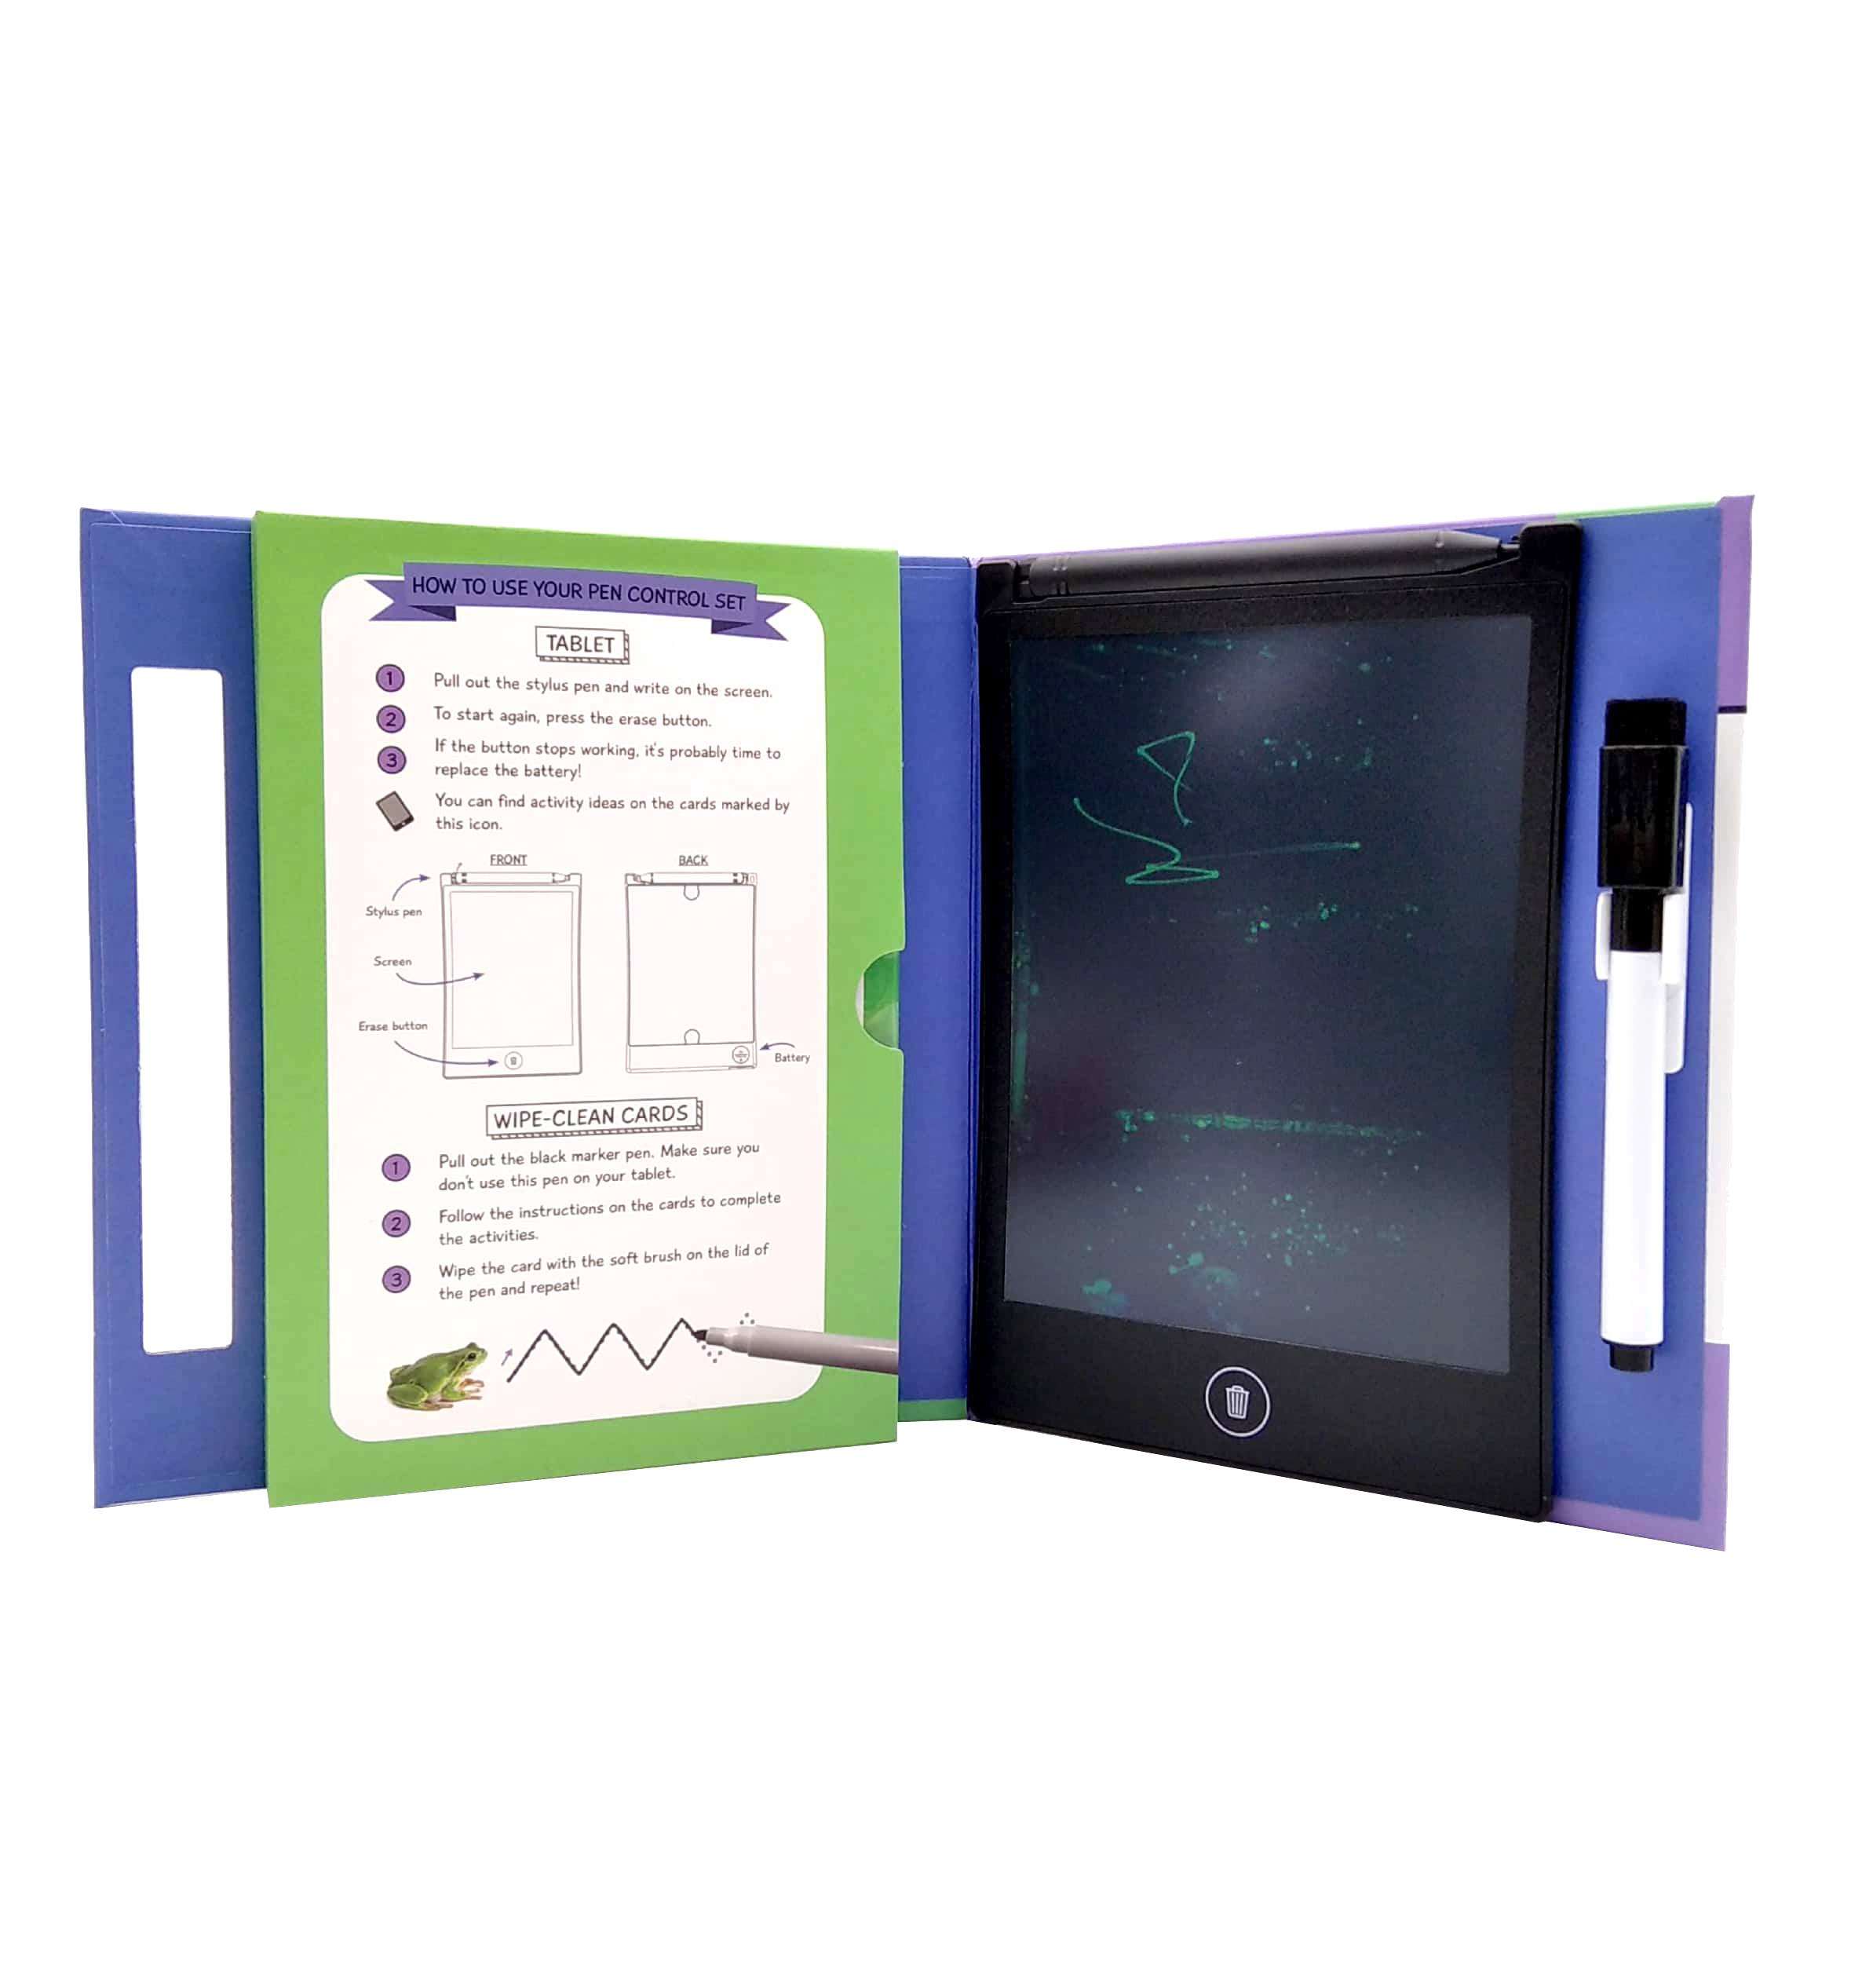 Reception Wipe Clean Cards & LCD Tablet: Pen Control